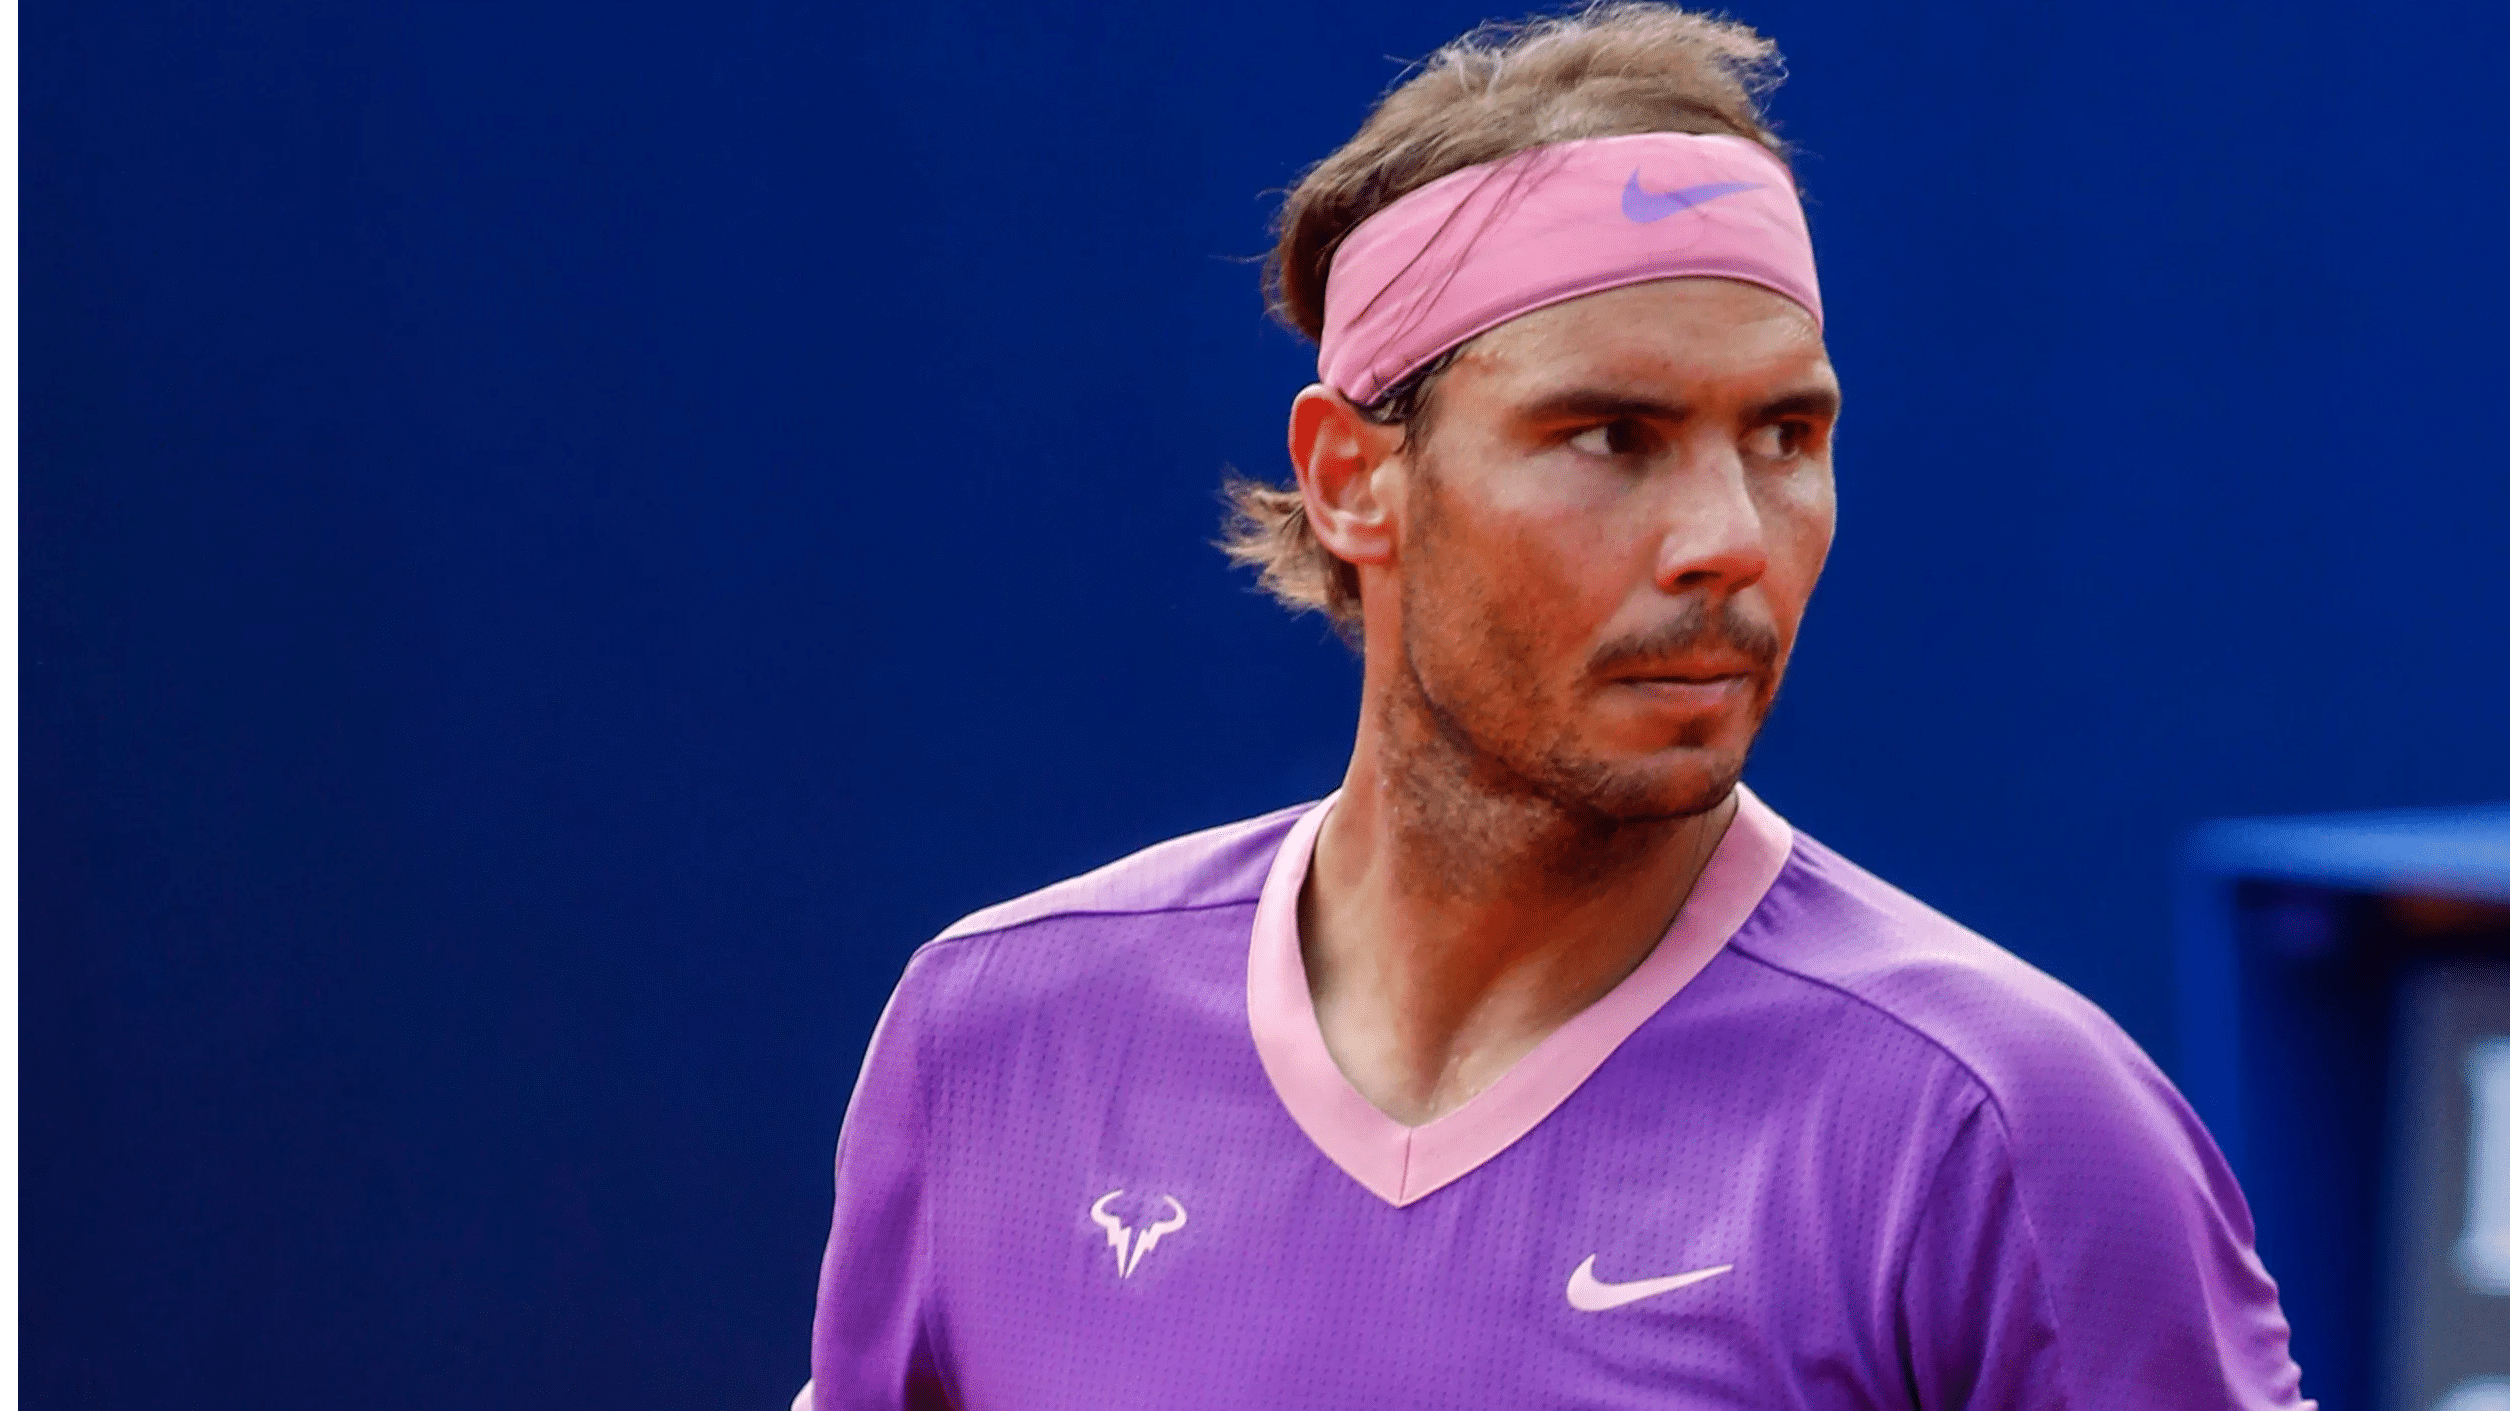 Listening to my body: Nadal pulls out of Wimbledon, Tokyo Olympics